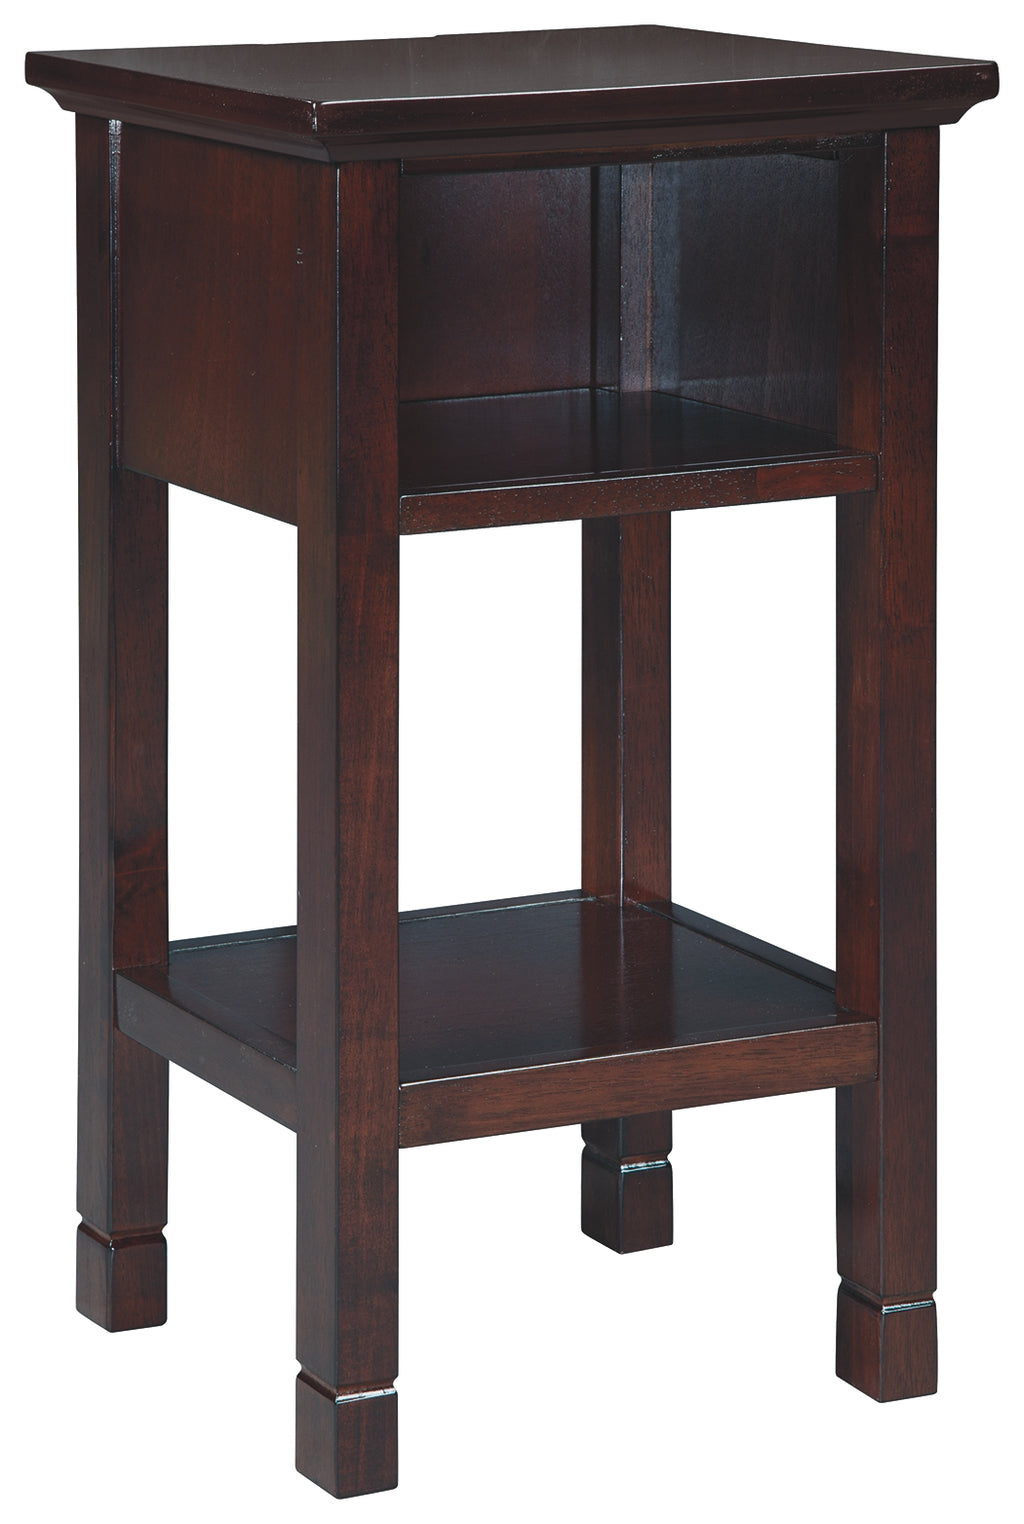 Marnville A4000088 Reddish Brown Accent Table